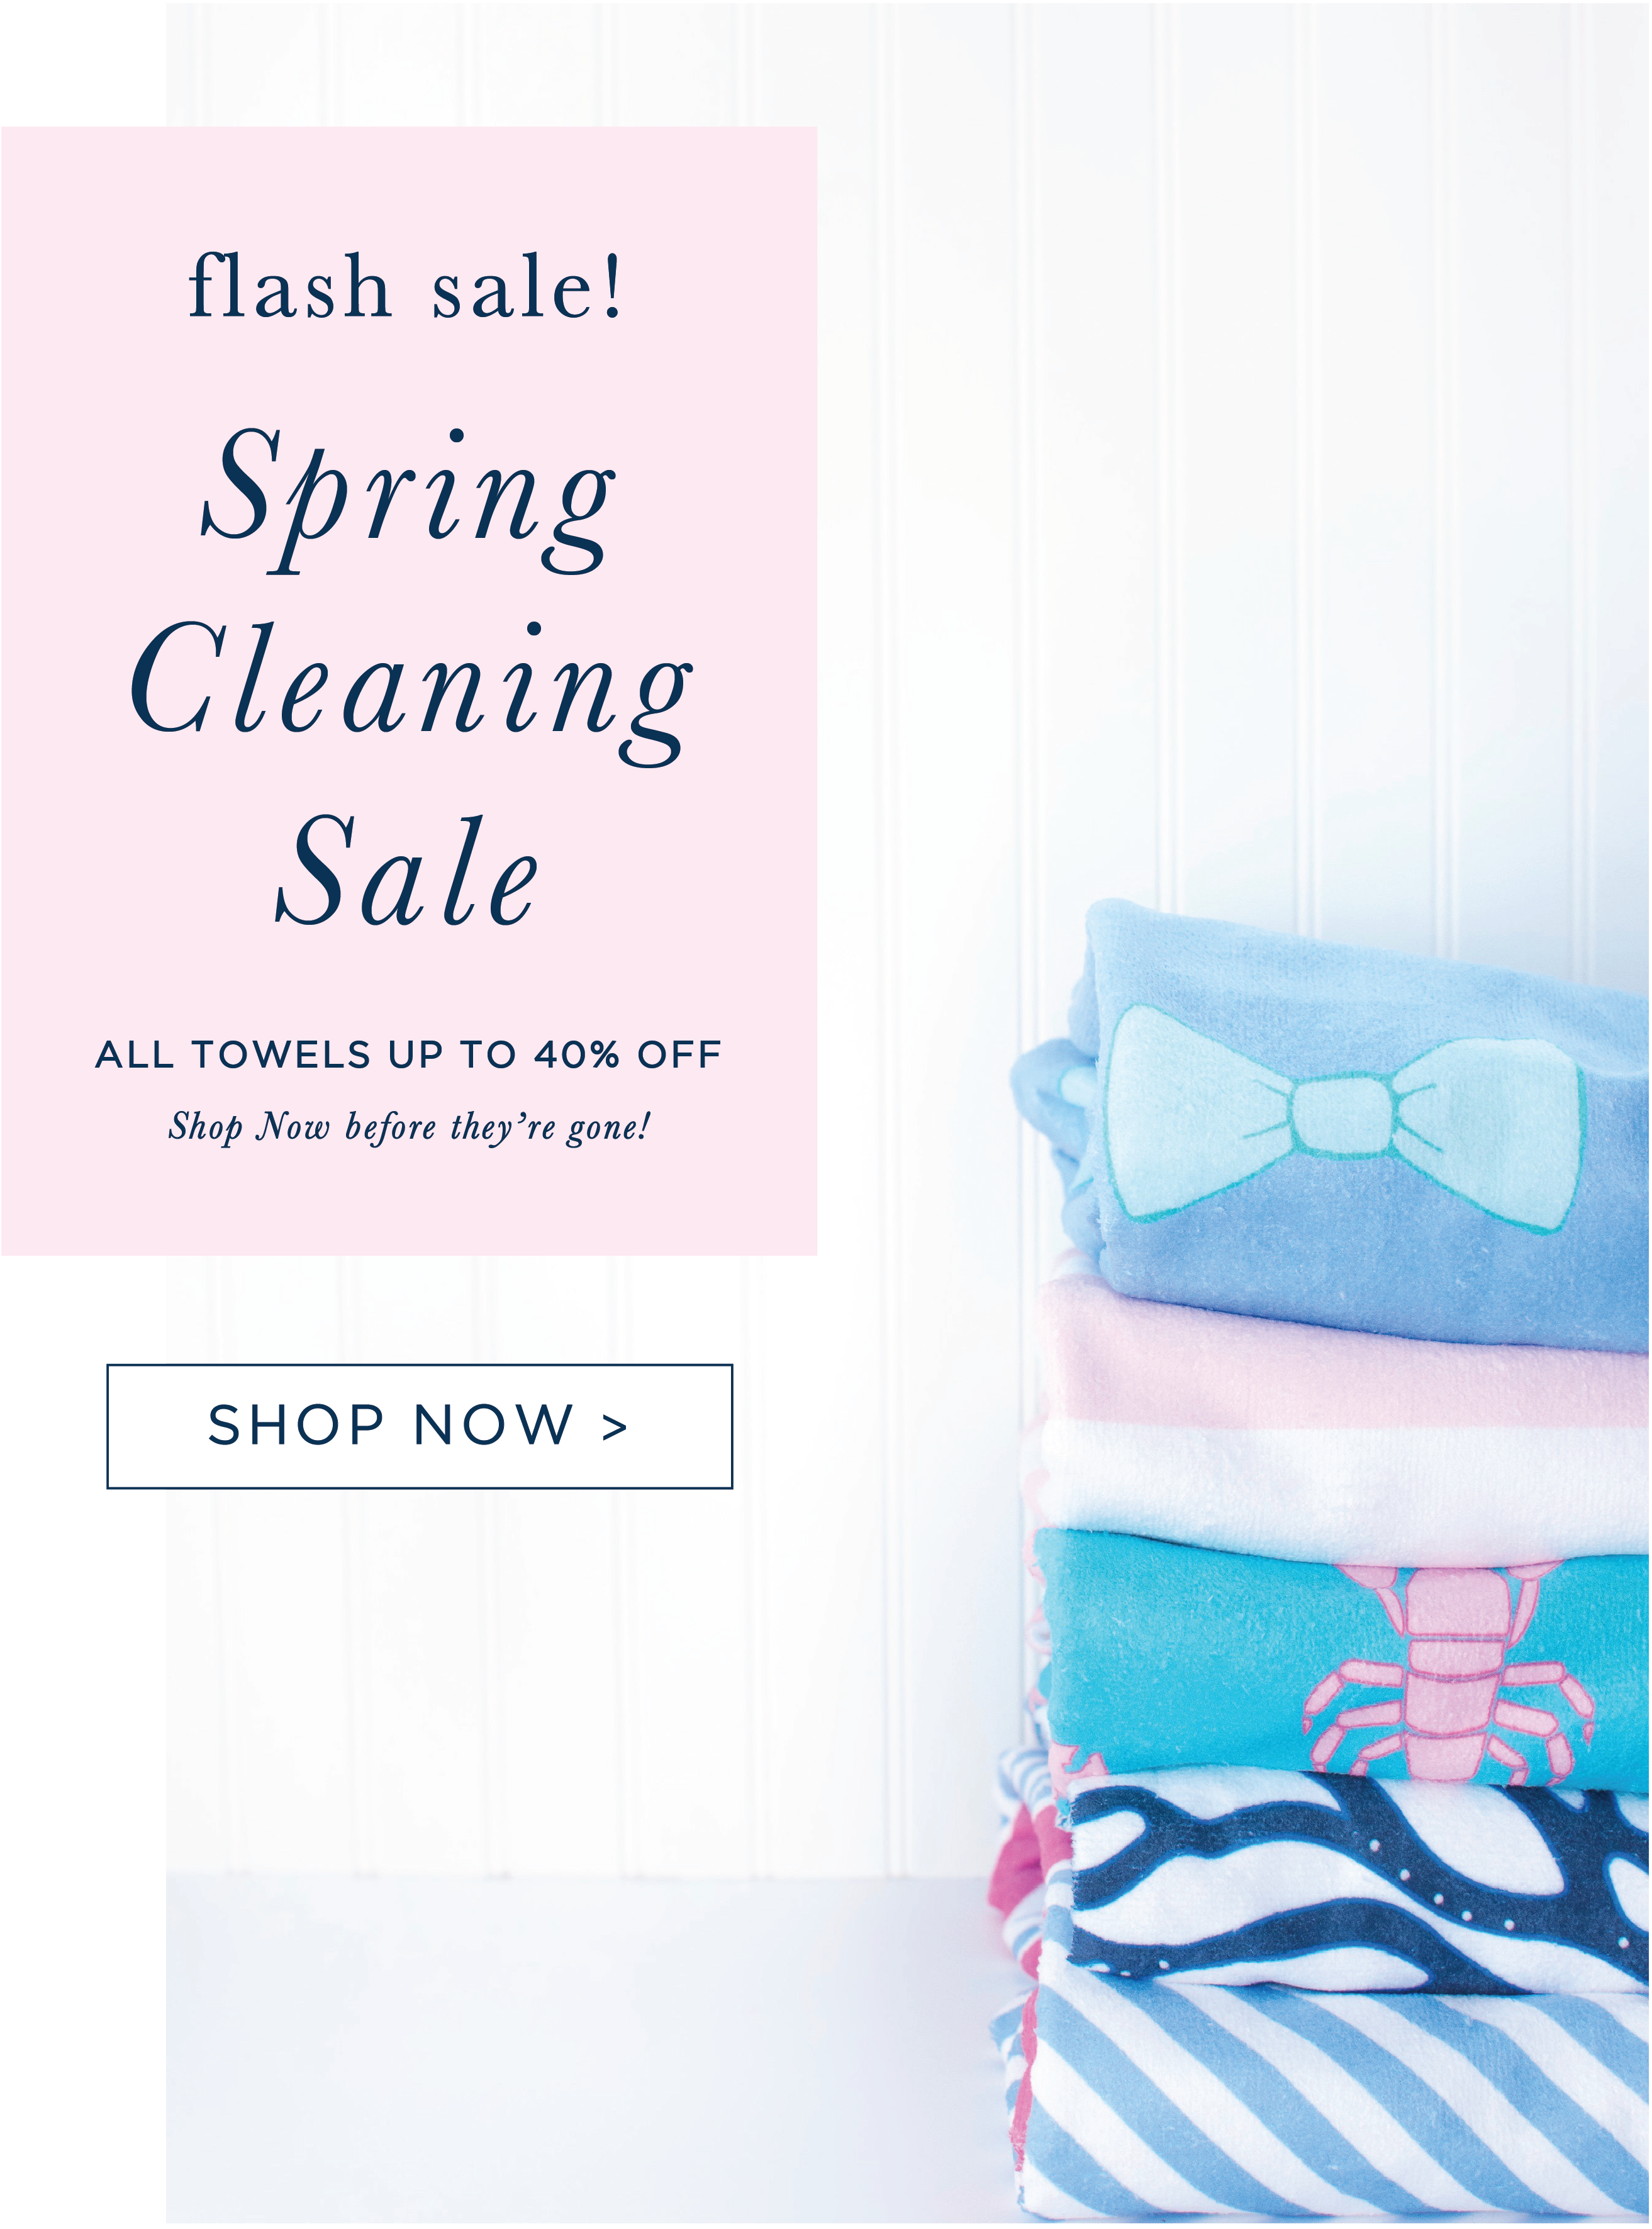 spring cleaning flash sale